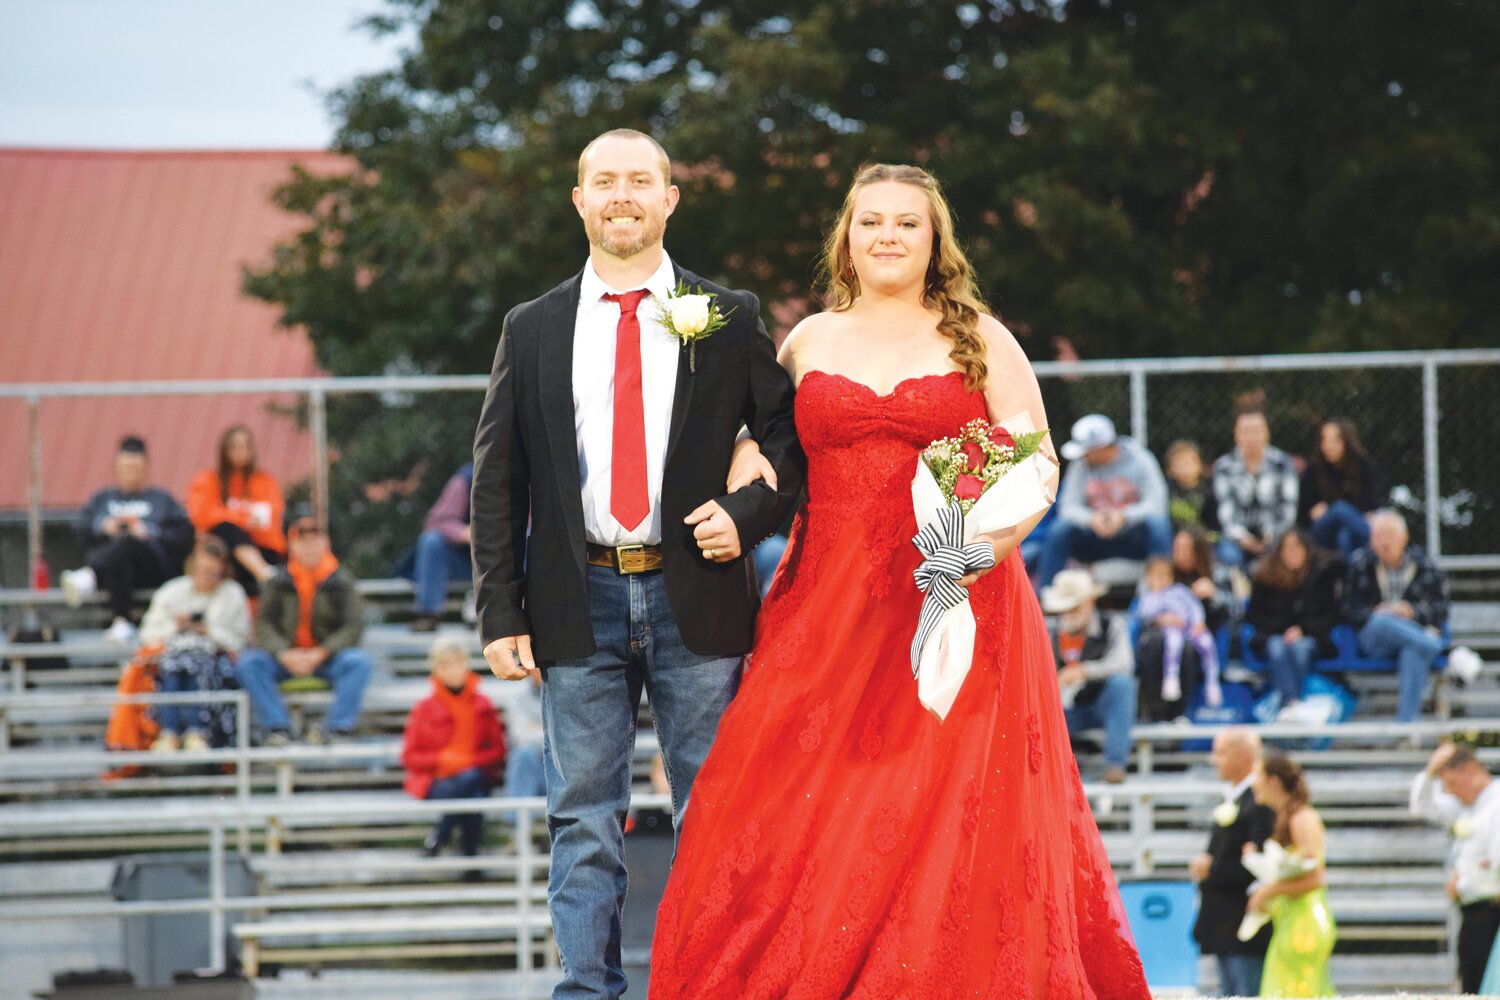 Sophomore Maid, Molly Thomas, was escorted by her father, Getty Thomas.